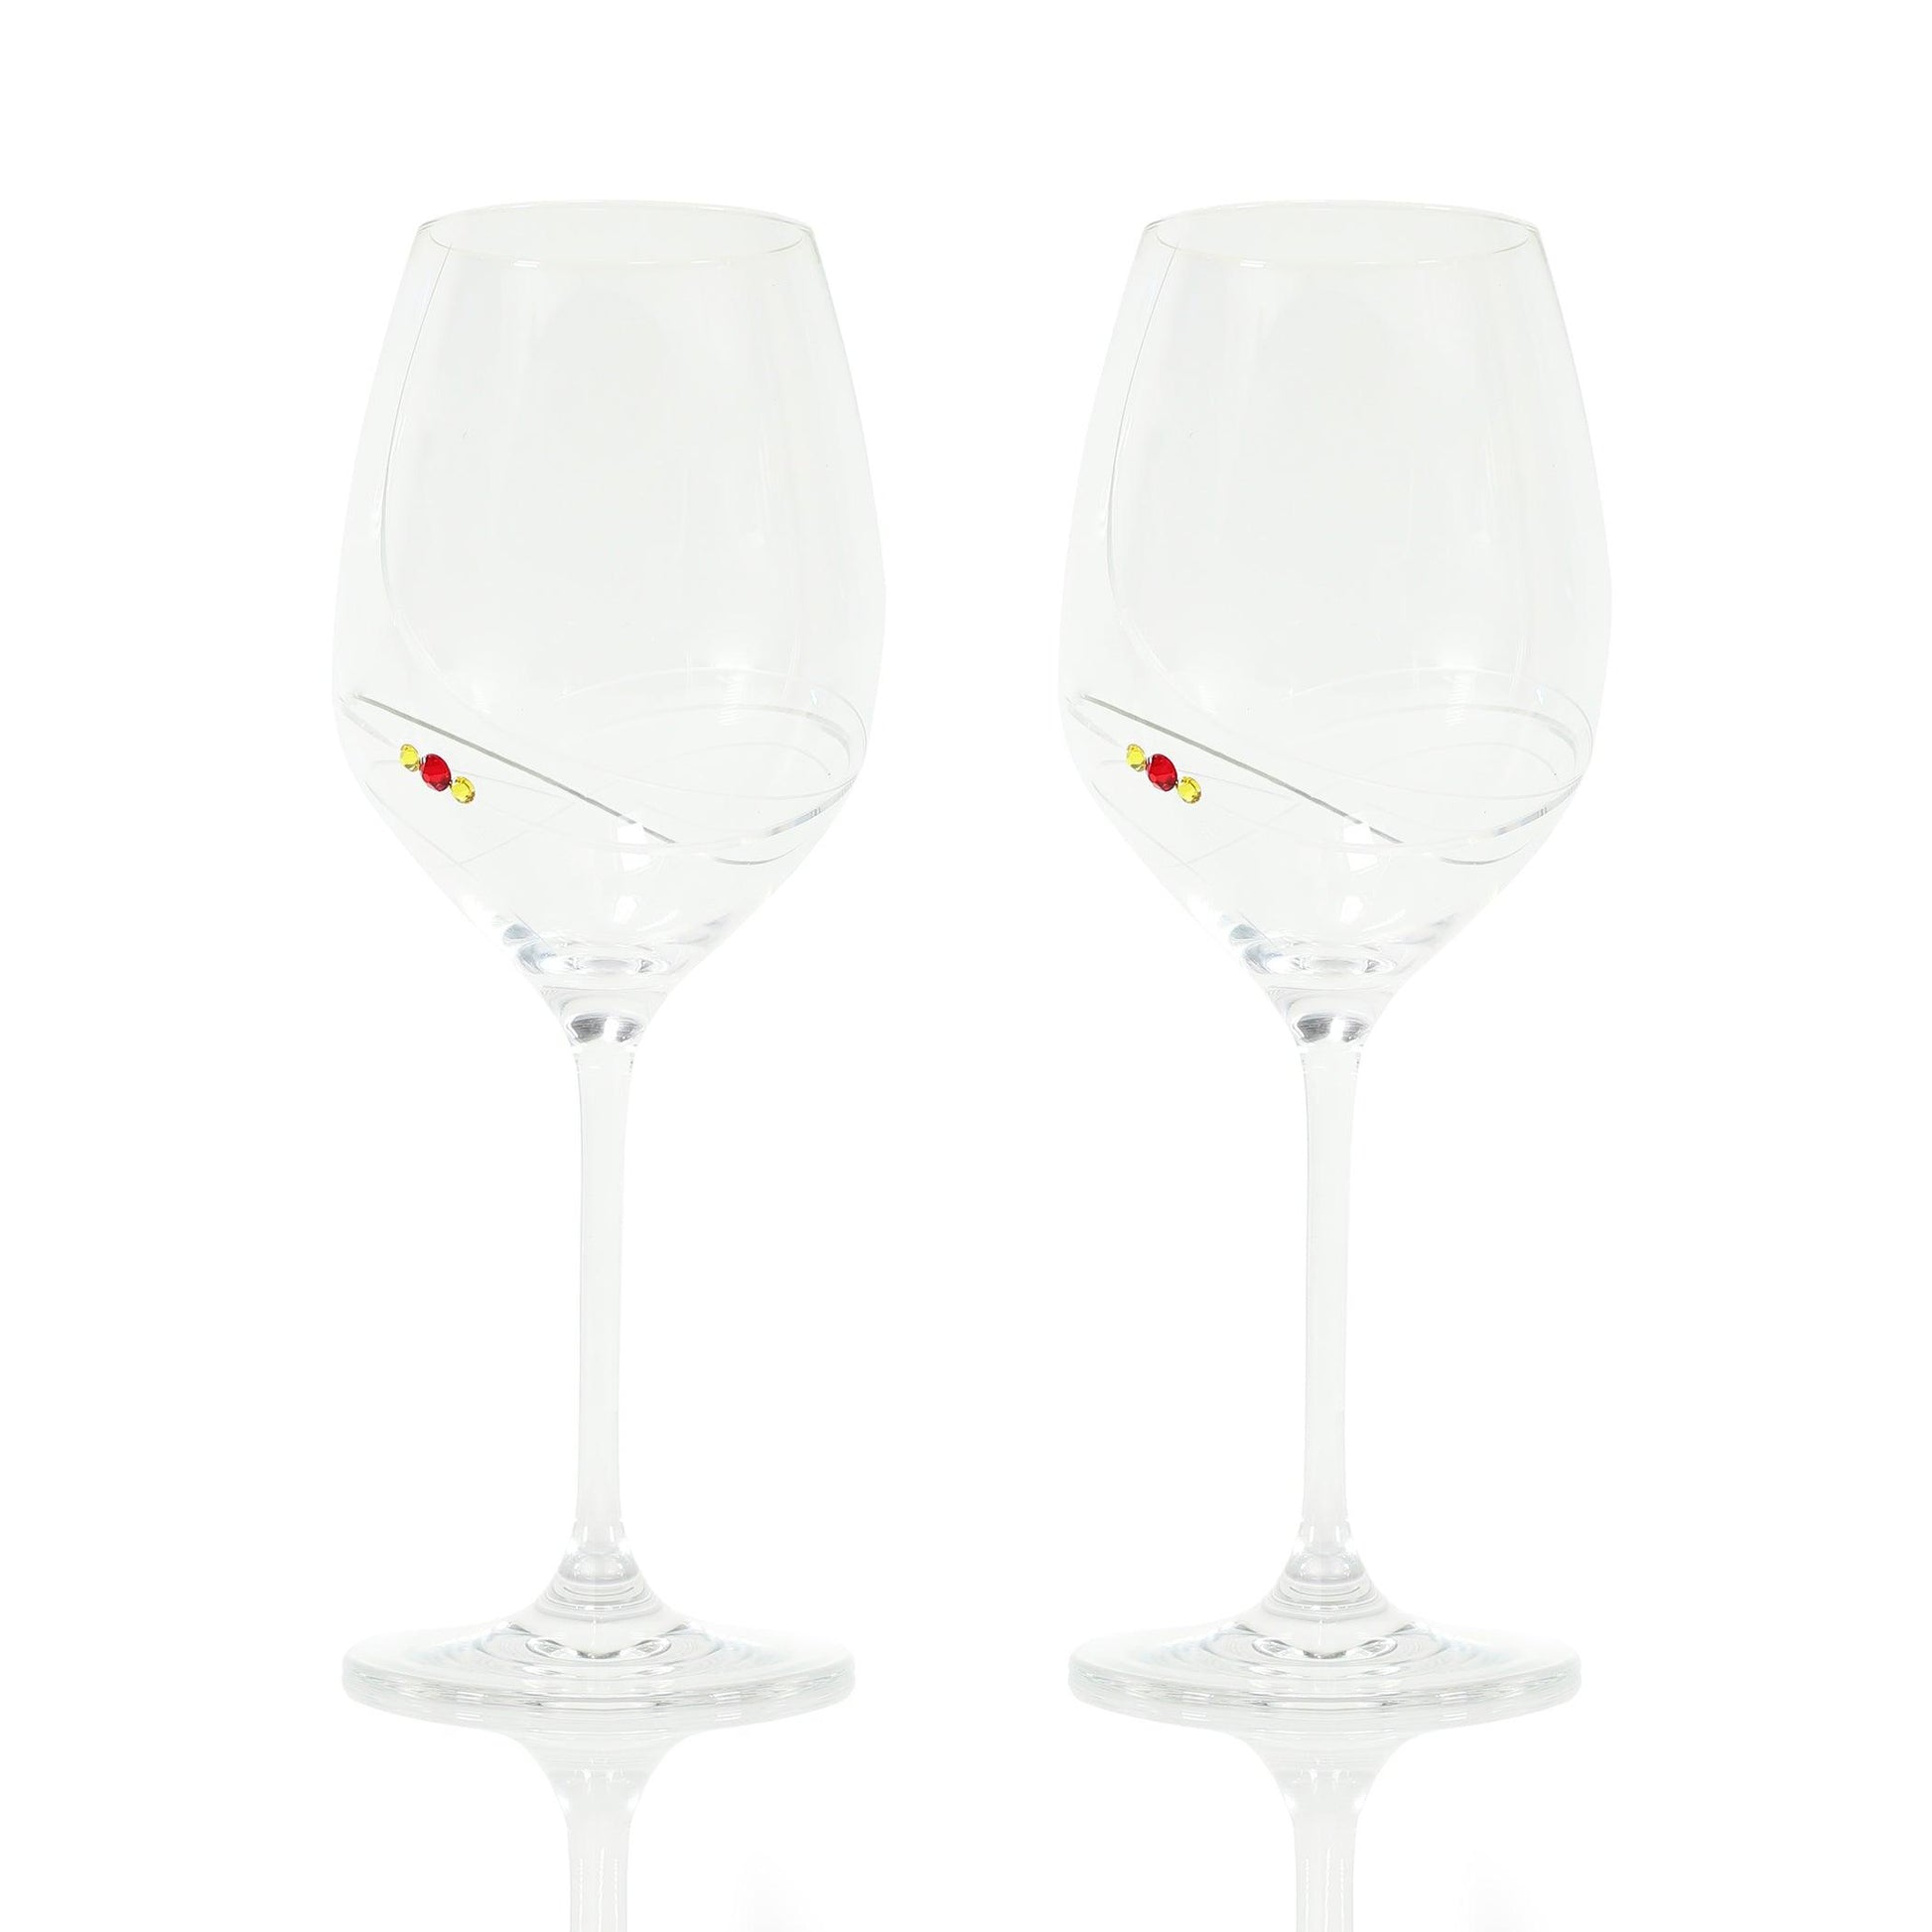 Wine Glass - Swarovski Crystals (7 photos) - Photography and Web Design - Los Angeles, US based Shopify Experts Revo Designs